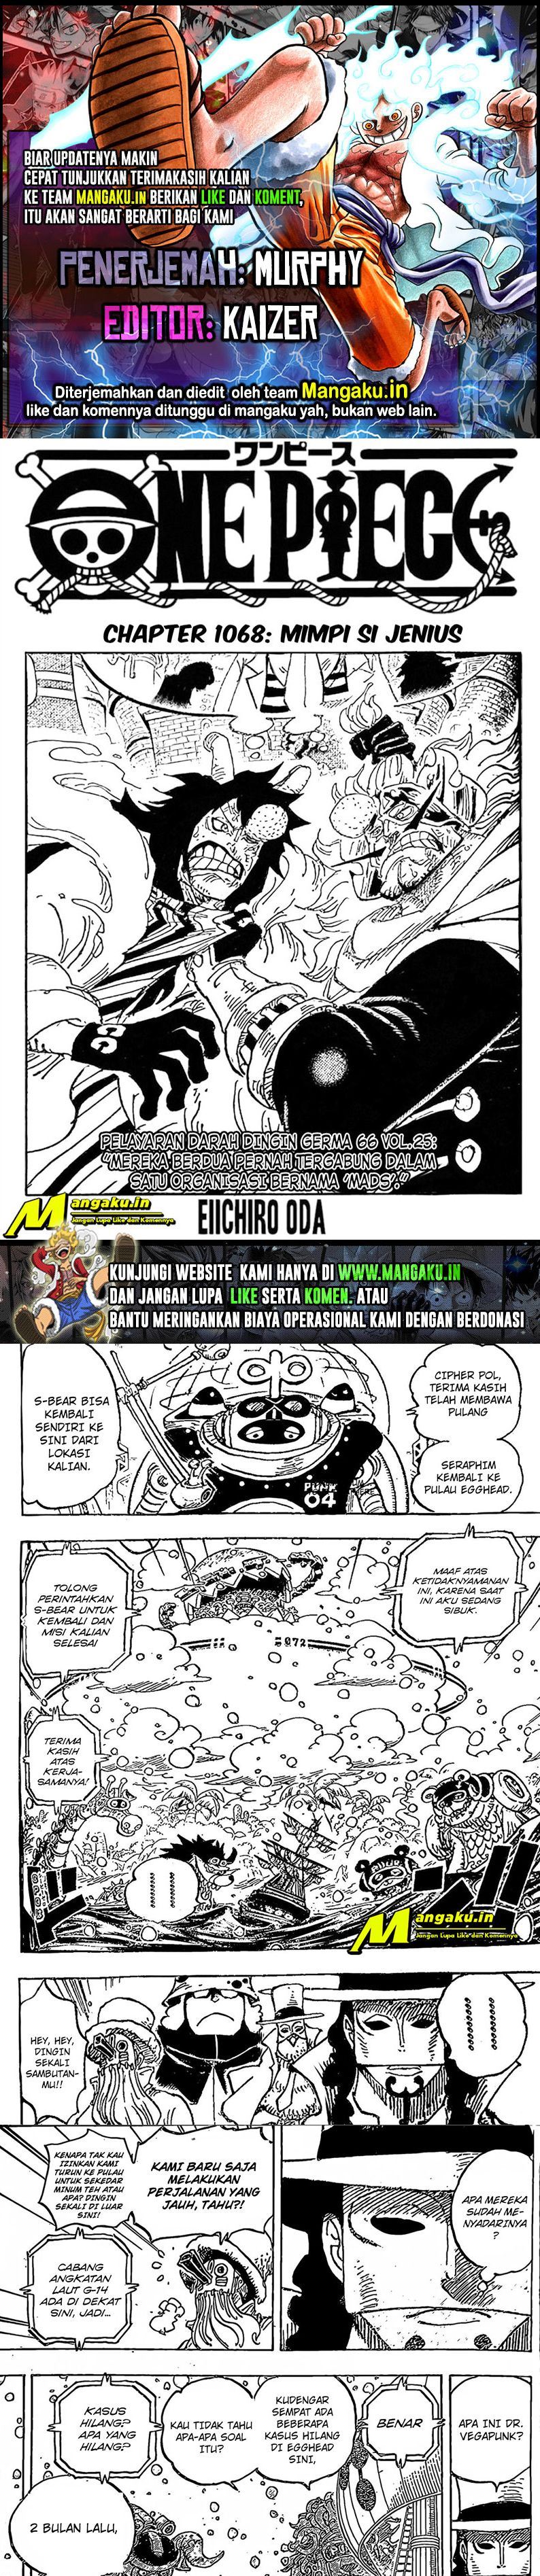 One Piece Chapter 1068 HQ 1